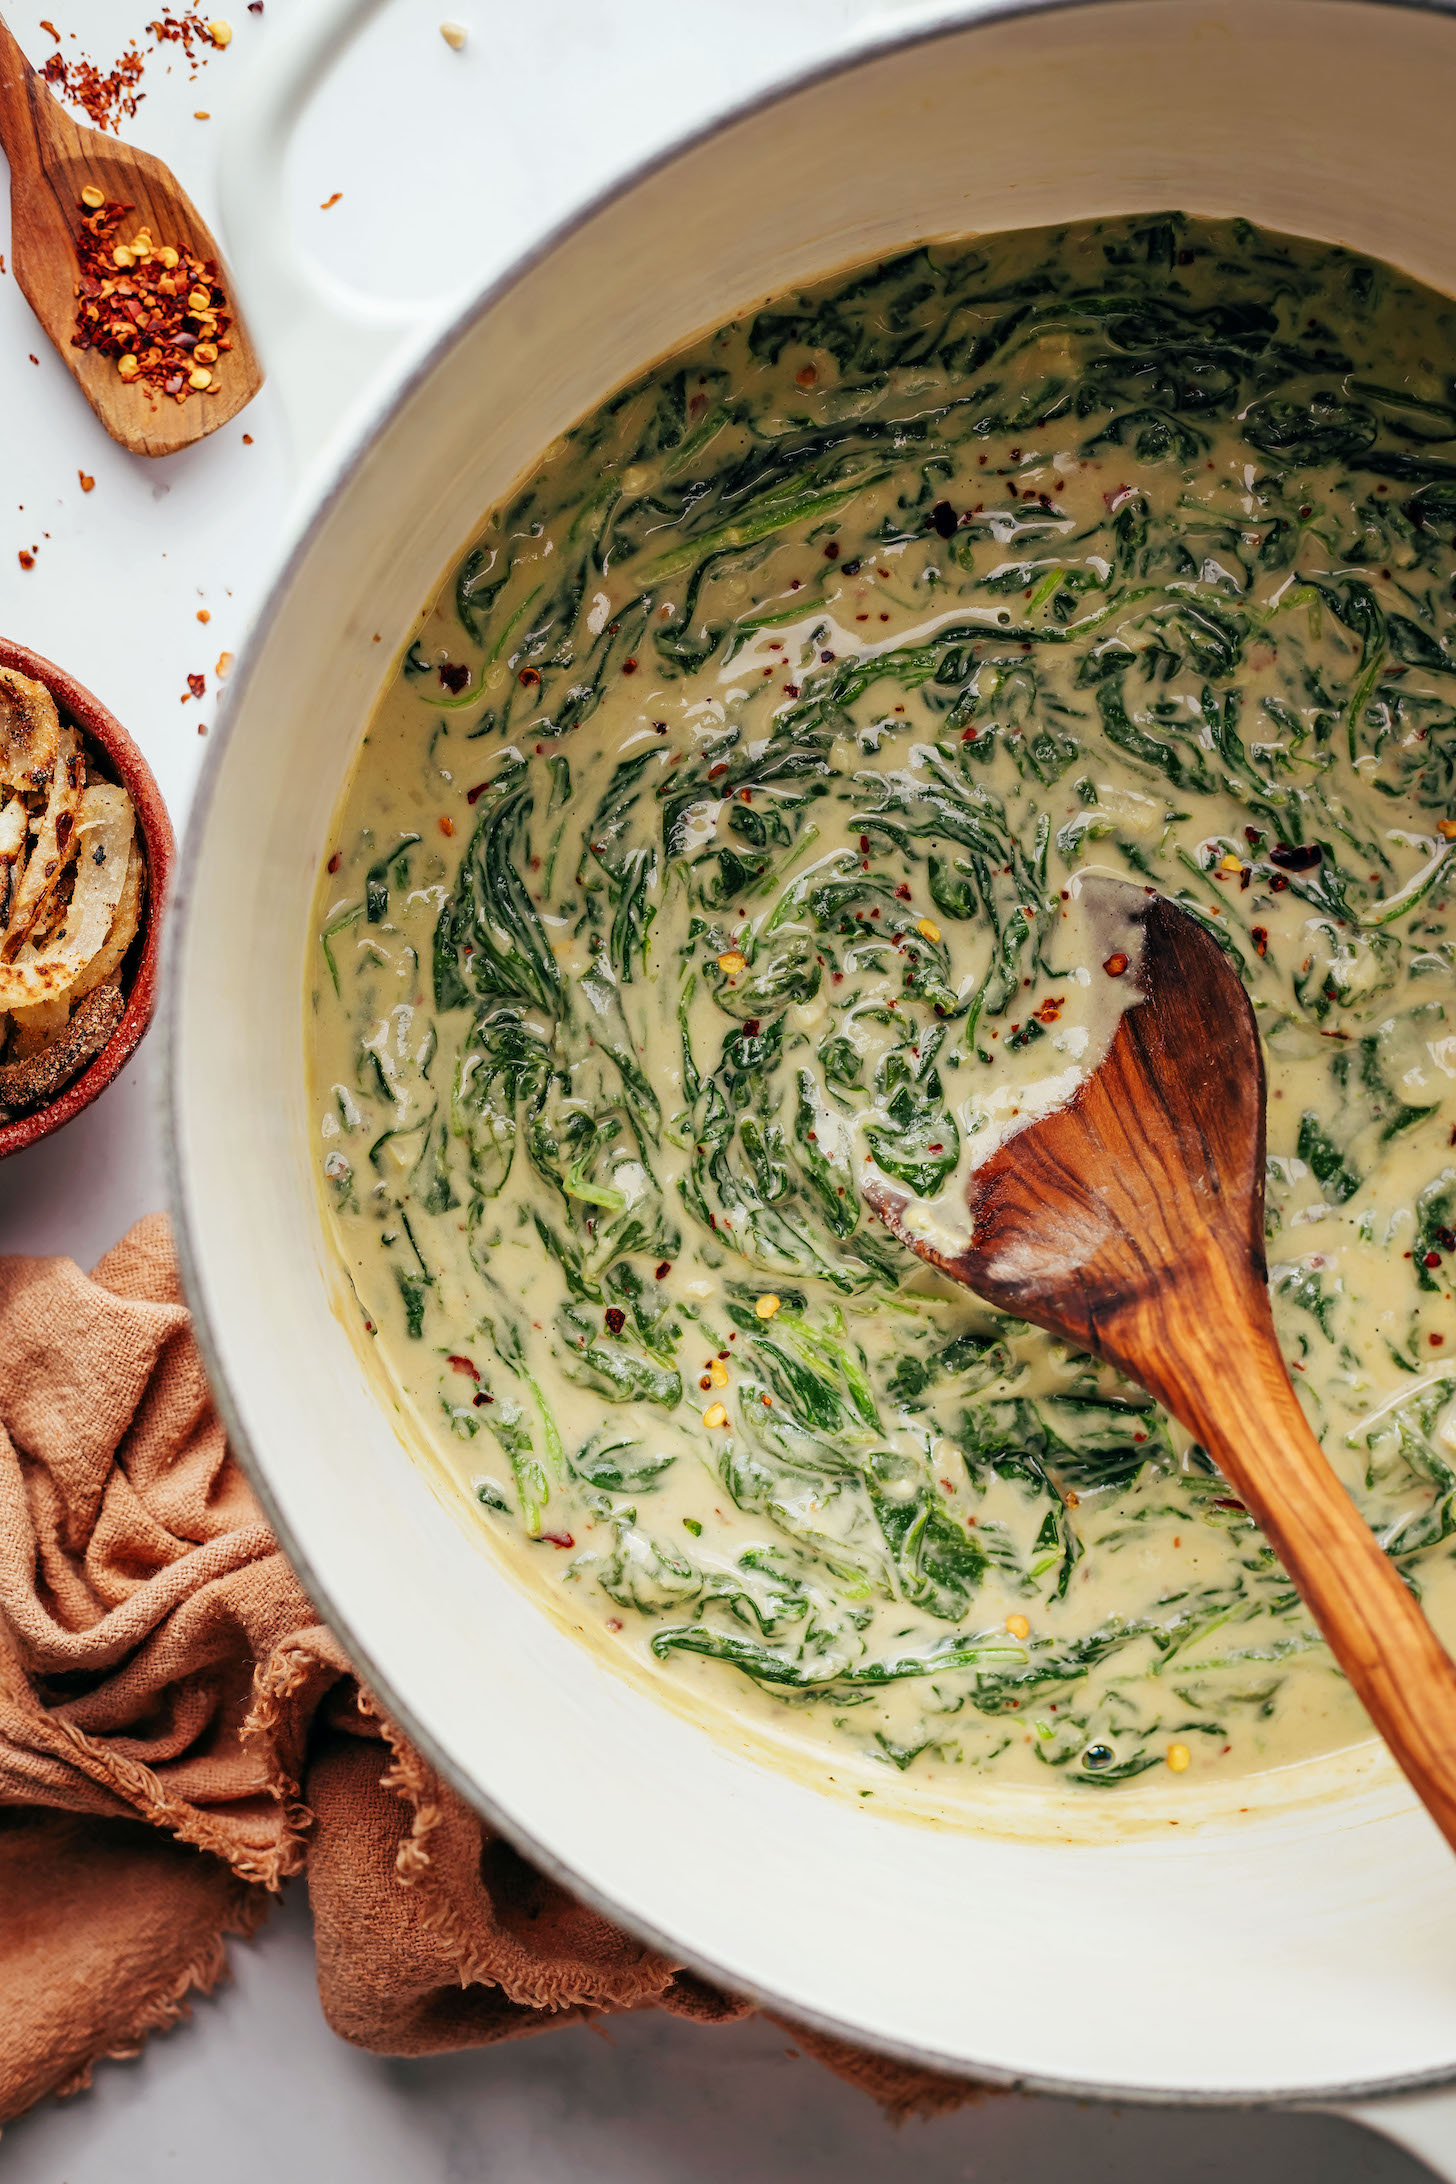 Wooden spoon in a Dutch oven with vegan creamed spinach